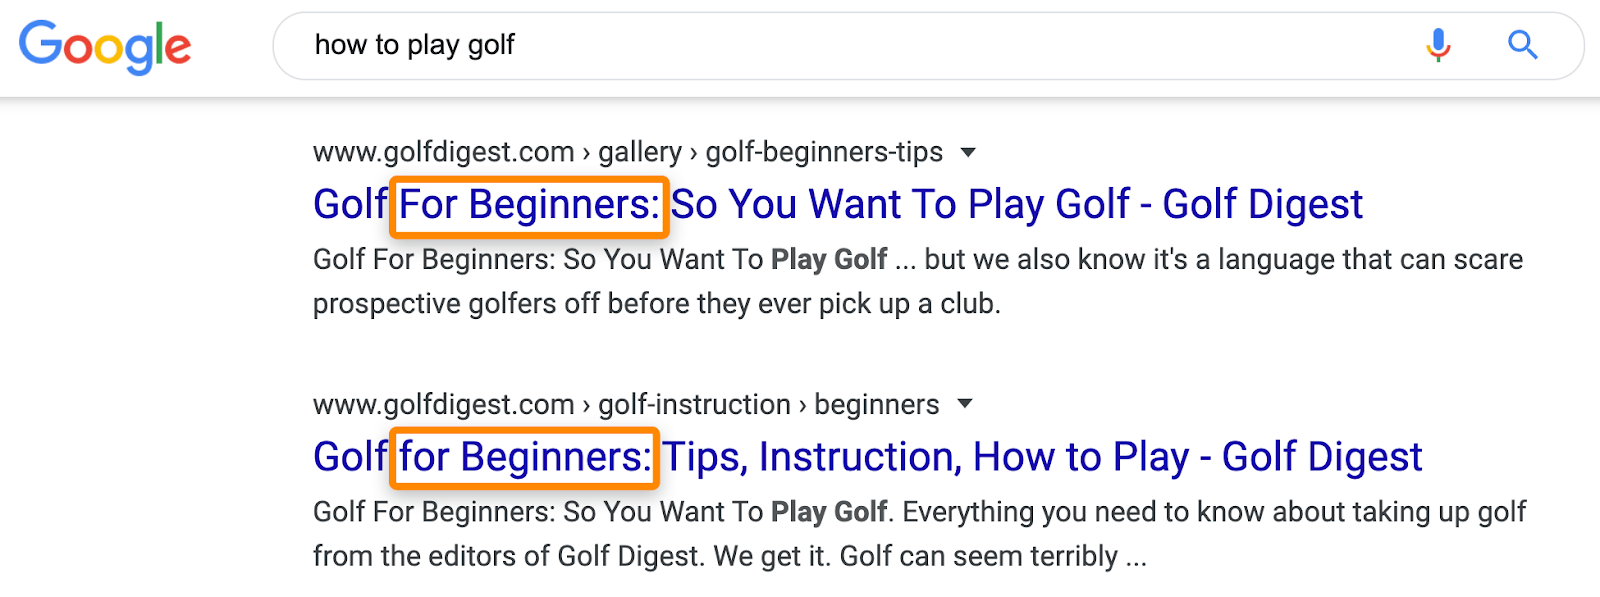 14 serp how to play golf